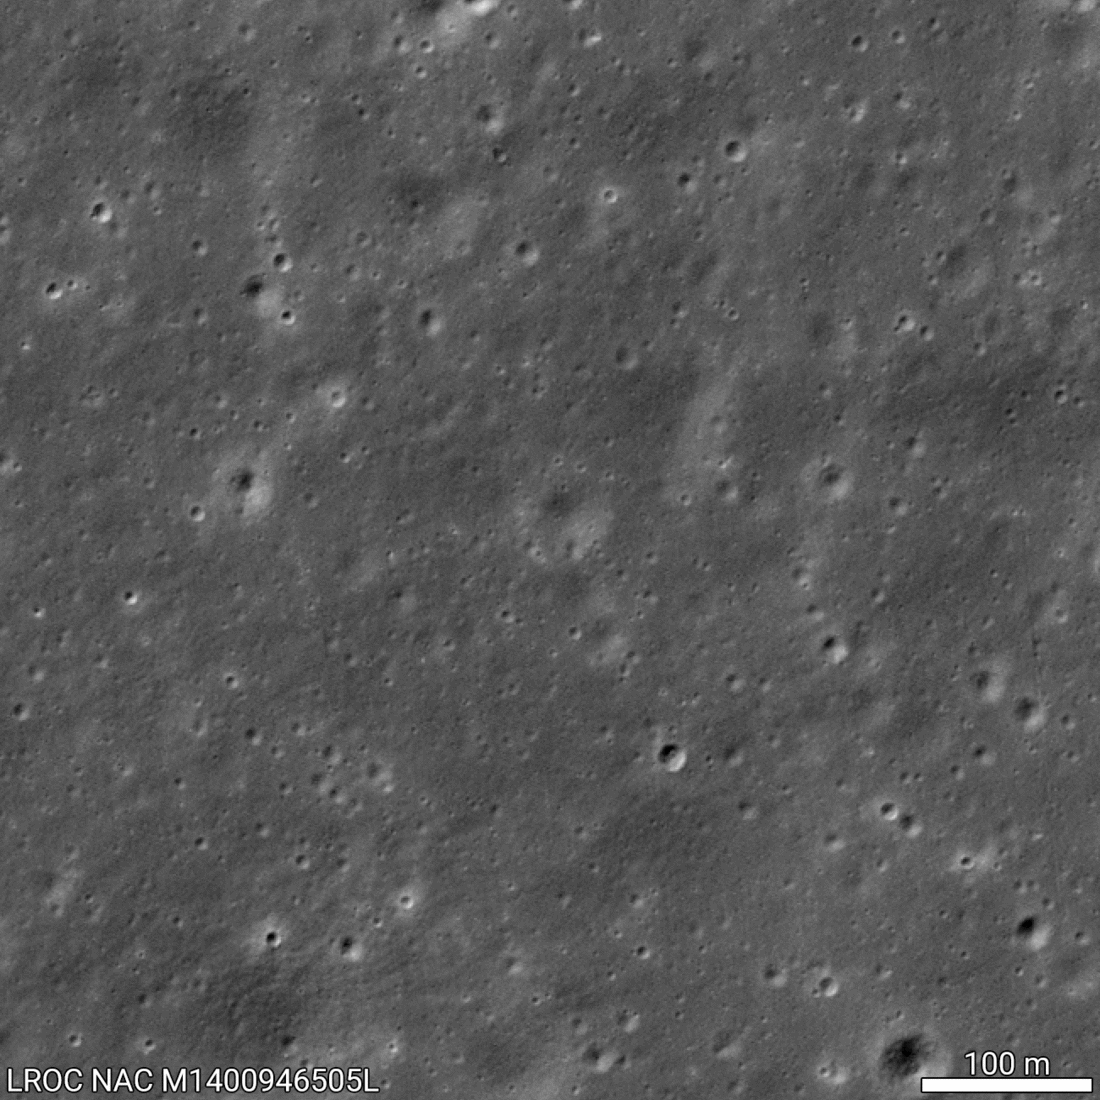 A black and white gif of two images of the Moon's surface before and after Chang'e 6 landed on the surface. A scale line for 100m is in the bottom right. The second image is slightly brighter around the landing site.